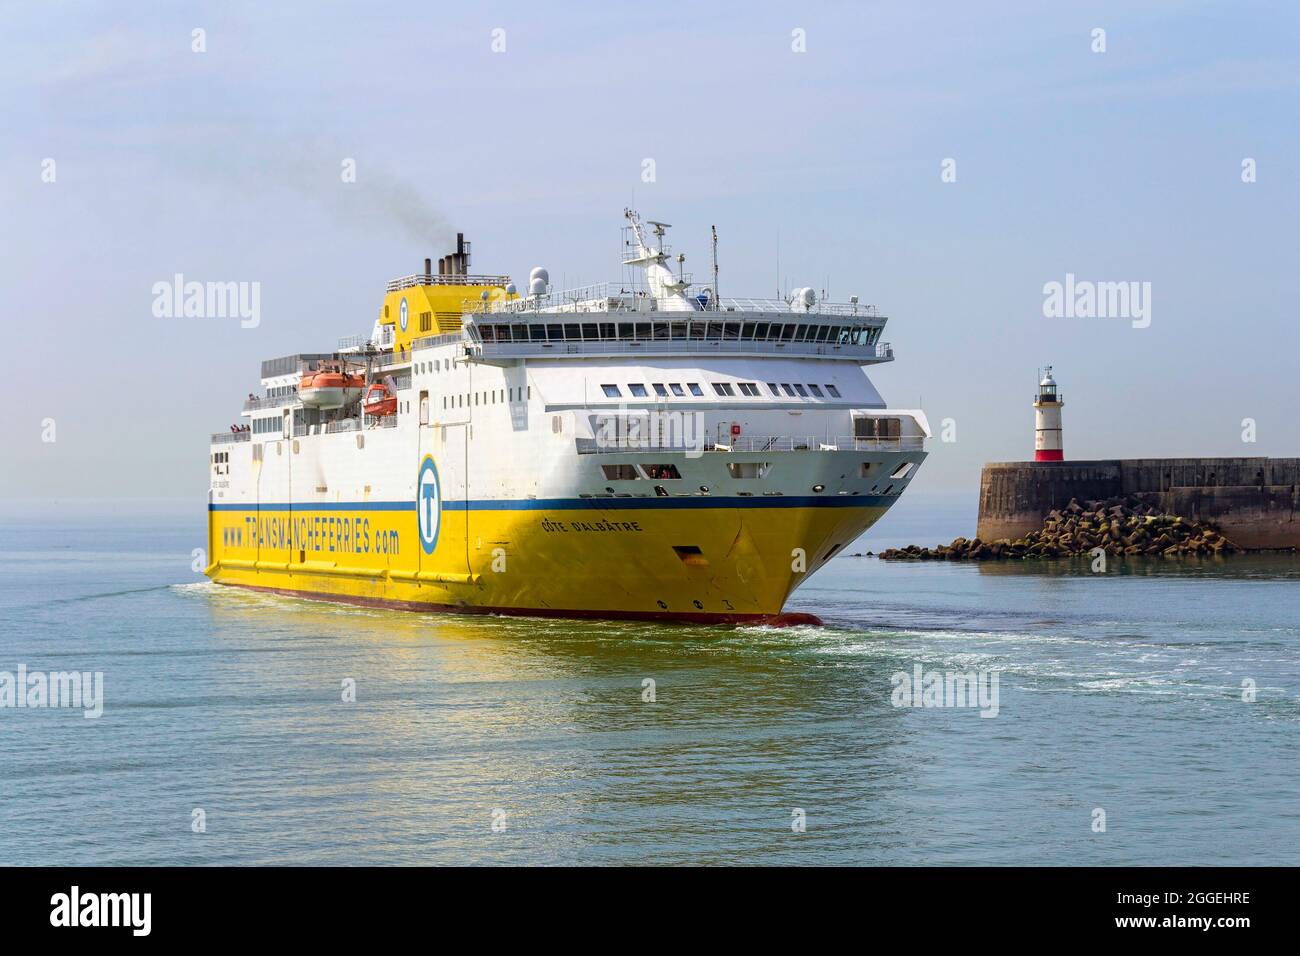 Côte d'Albâtre is a passenger ferry operated by DFDS on the cross-Channel Dieppe-Newhaven route, under the brand Transmanche Ferries. Stock Photo